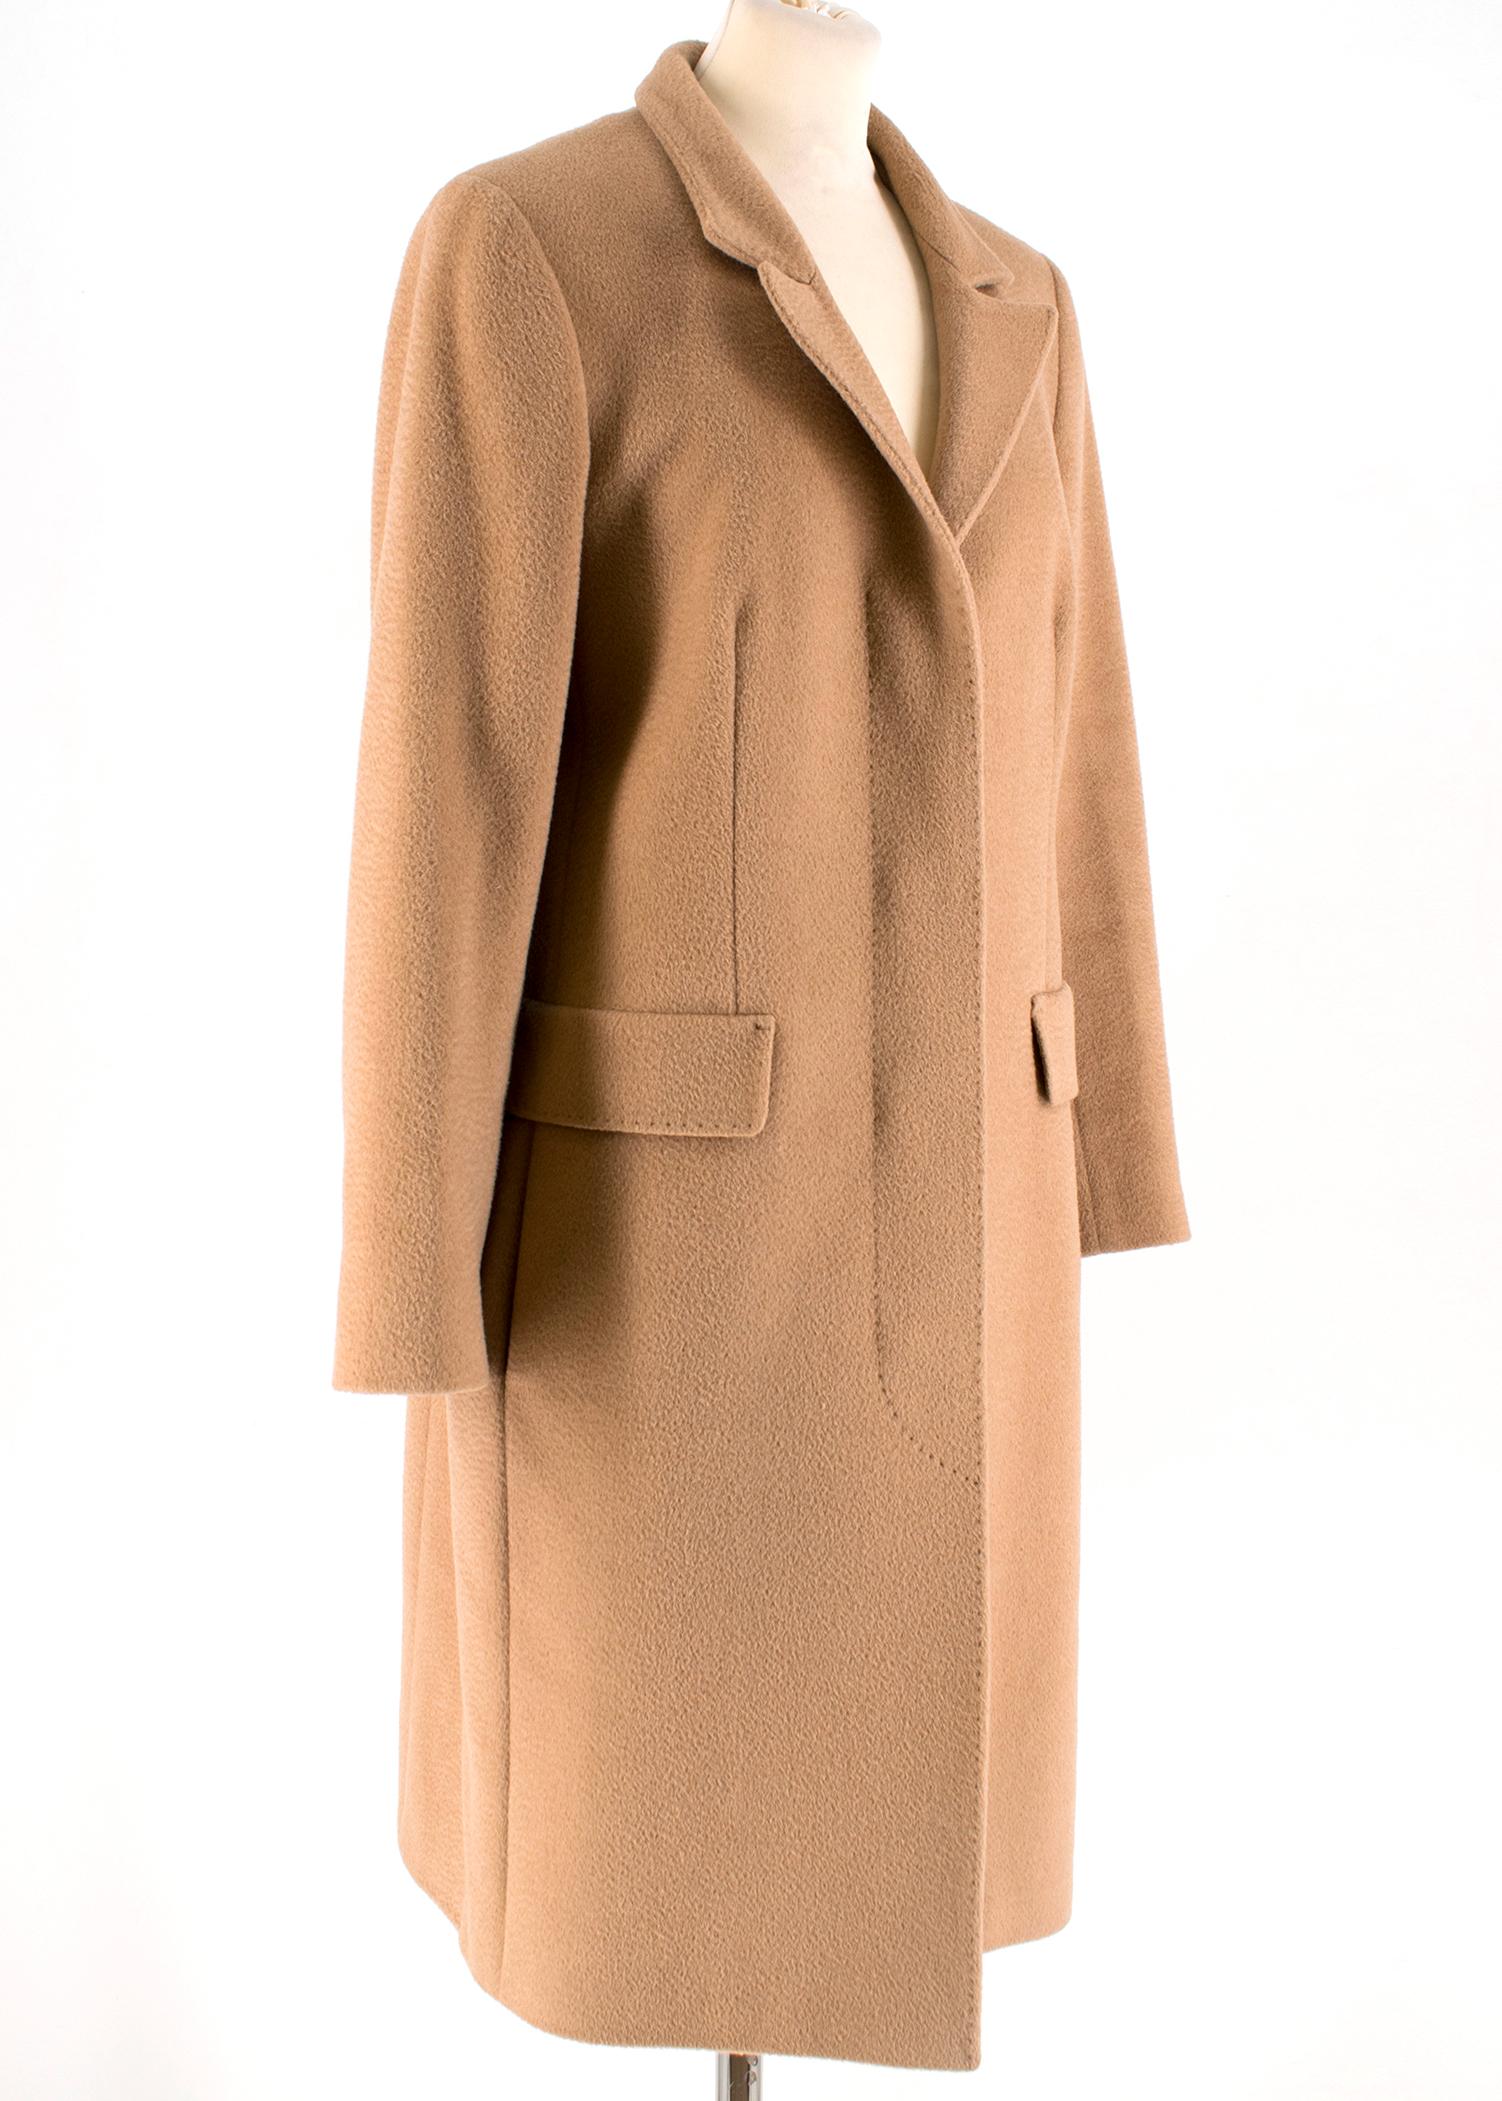 Max Mara Camel Hair Coat 

- Concealed button closure
- Long coat in pure camel fabric 
- Patch pockets on the front of the coat 
- Single vent to the back

Please note, these items are pre-owned and may show signs of being stored even when unworn